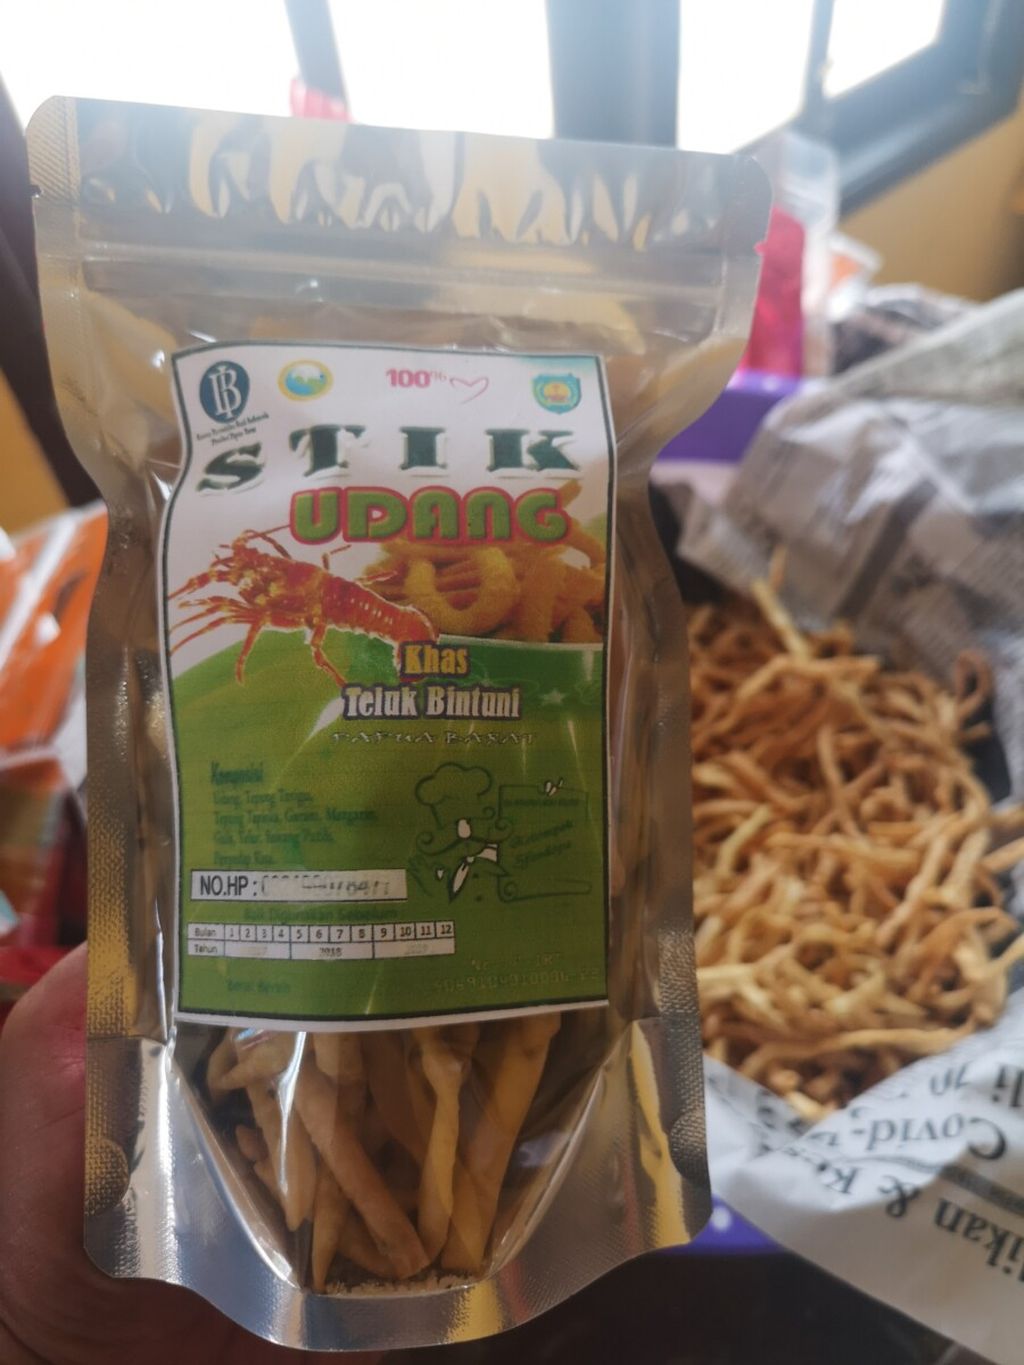 Processed product from shrimp made by Ida Padwa. This product is branded Sfandoya.